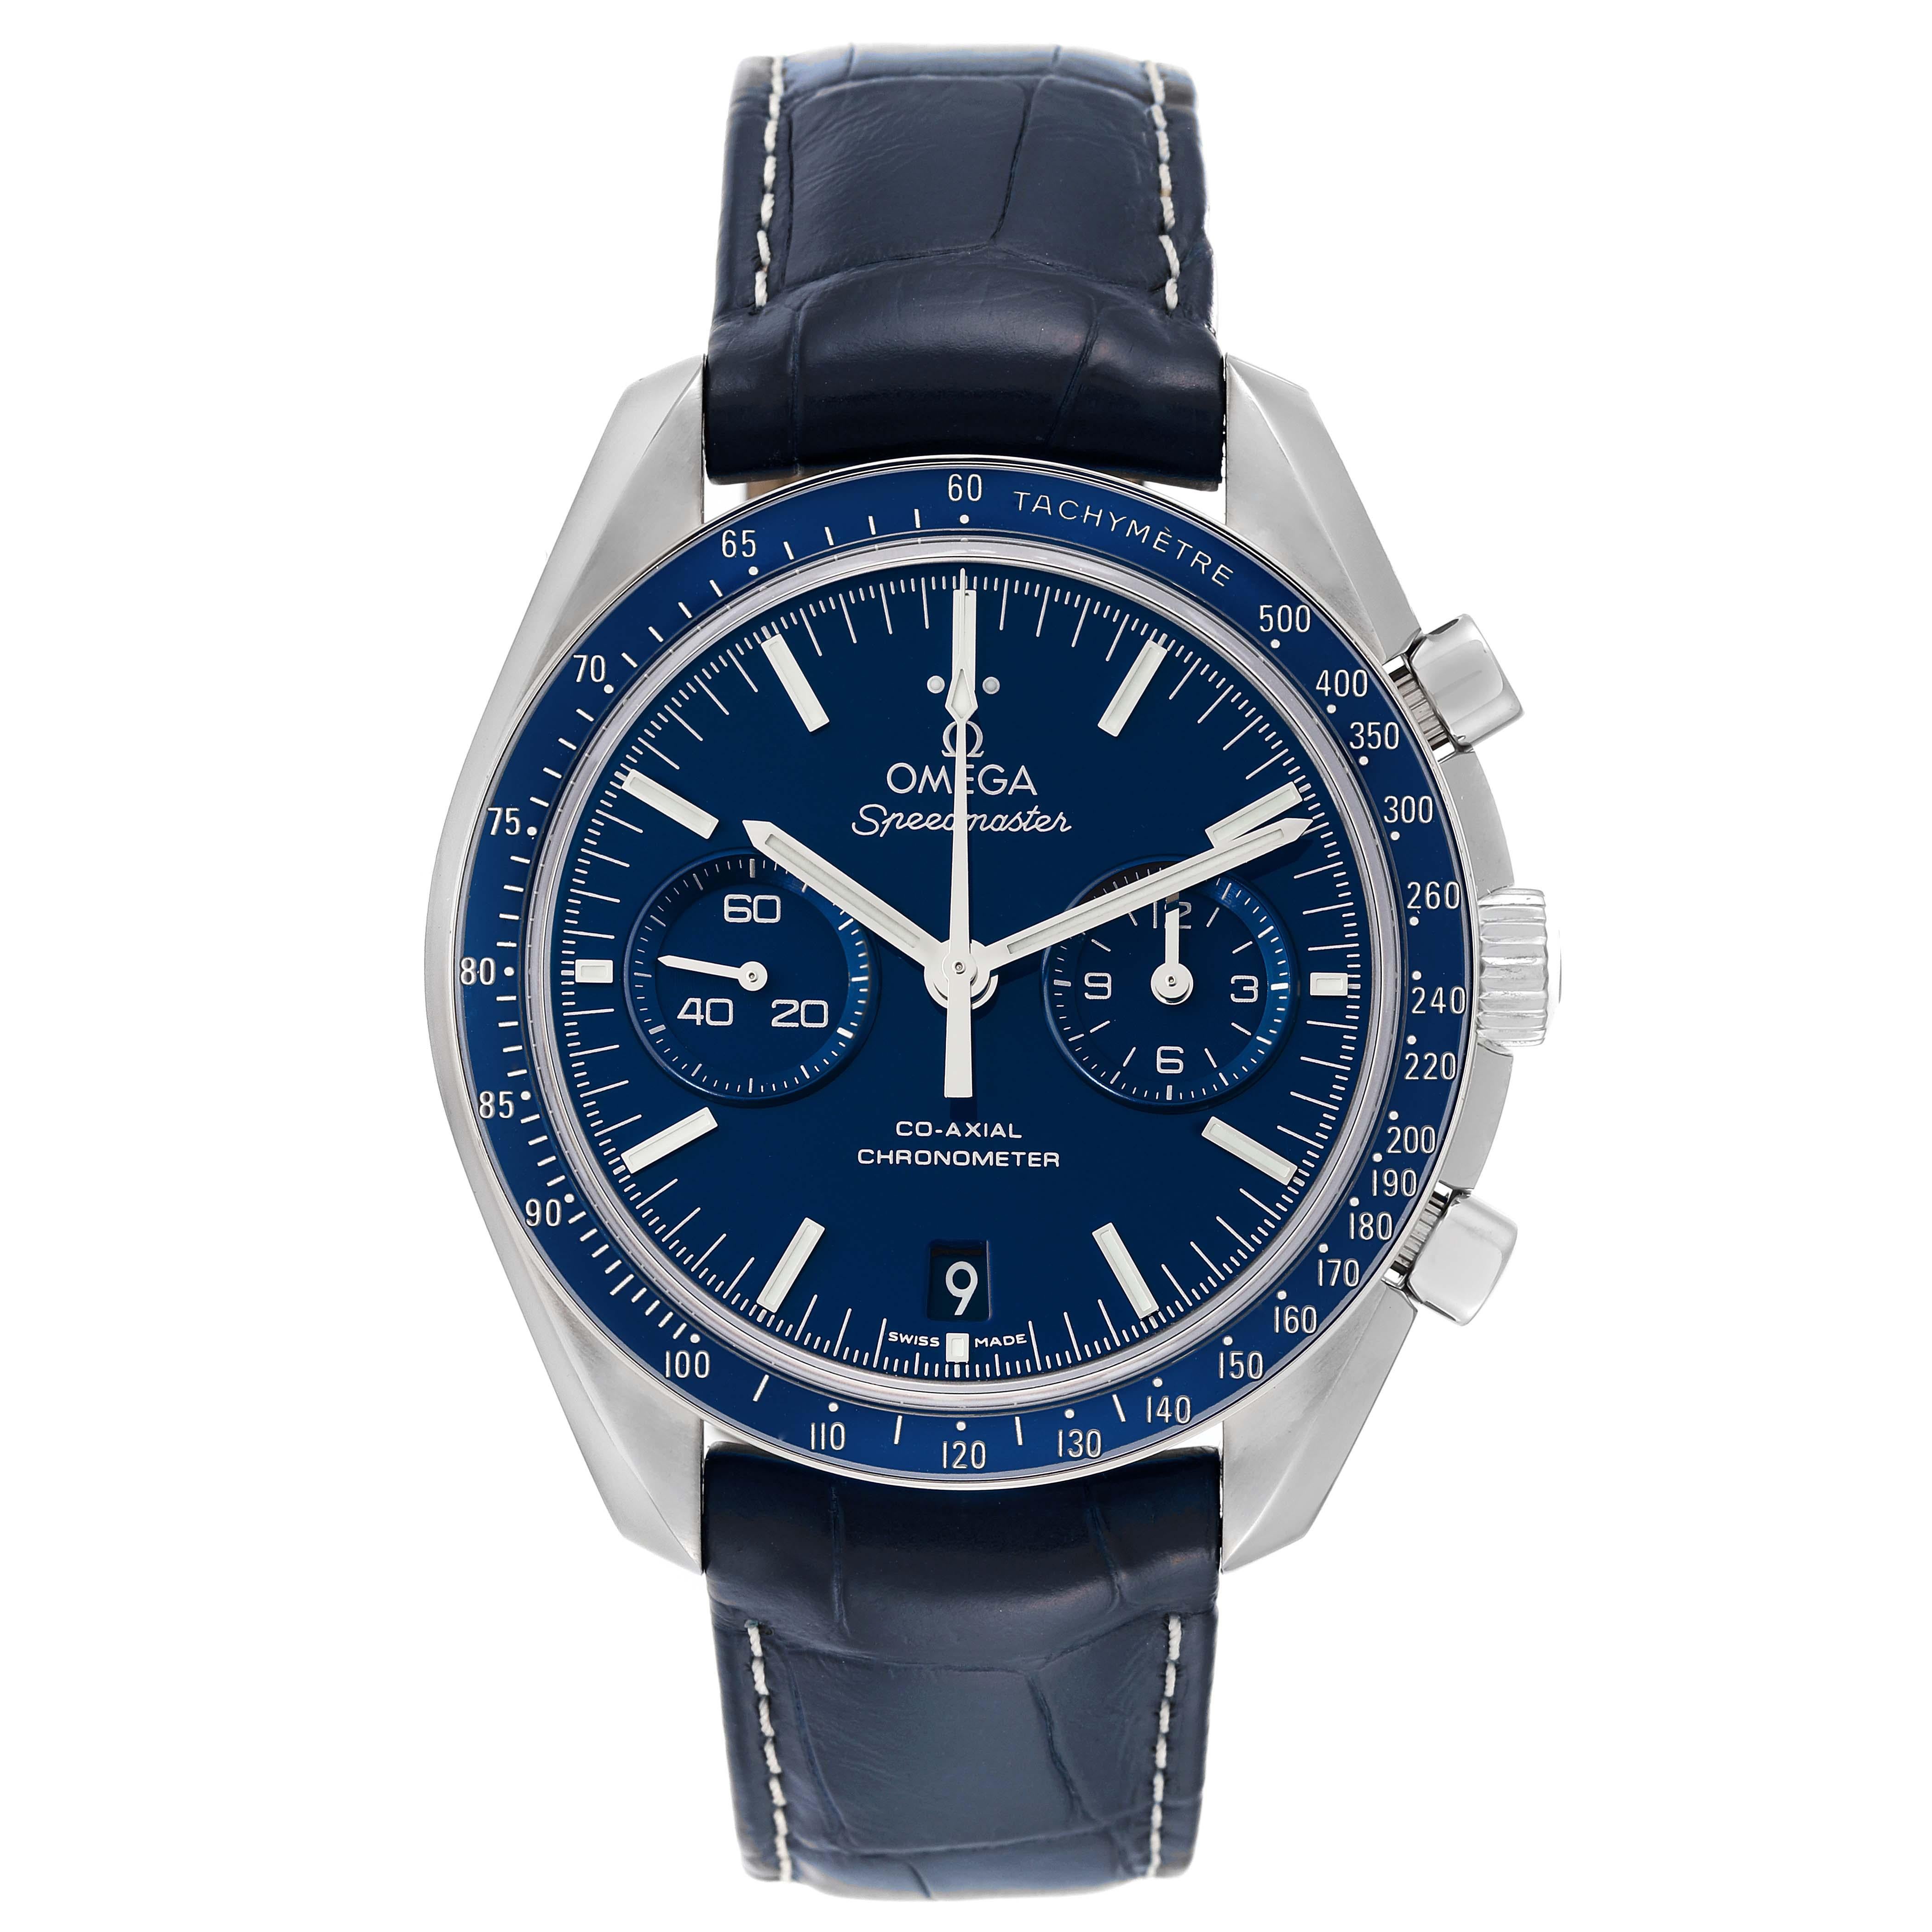 Omega Speedmaster Blue Dial Titanium Mens MoonWatch 311.93.44.51.03.001 Box Card. Automatic self-winding chronograph movement with column wheel mechanism and Co-Axial escapement. Silicon balance-spring on free sprung-balance, 2 barrels mounted in